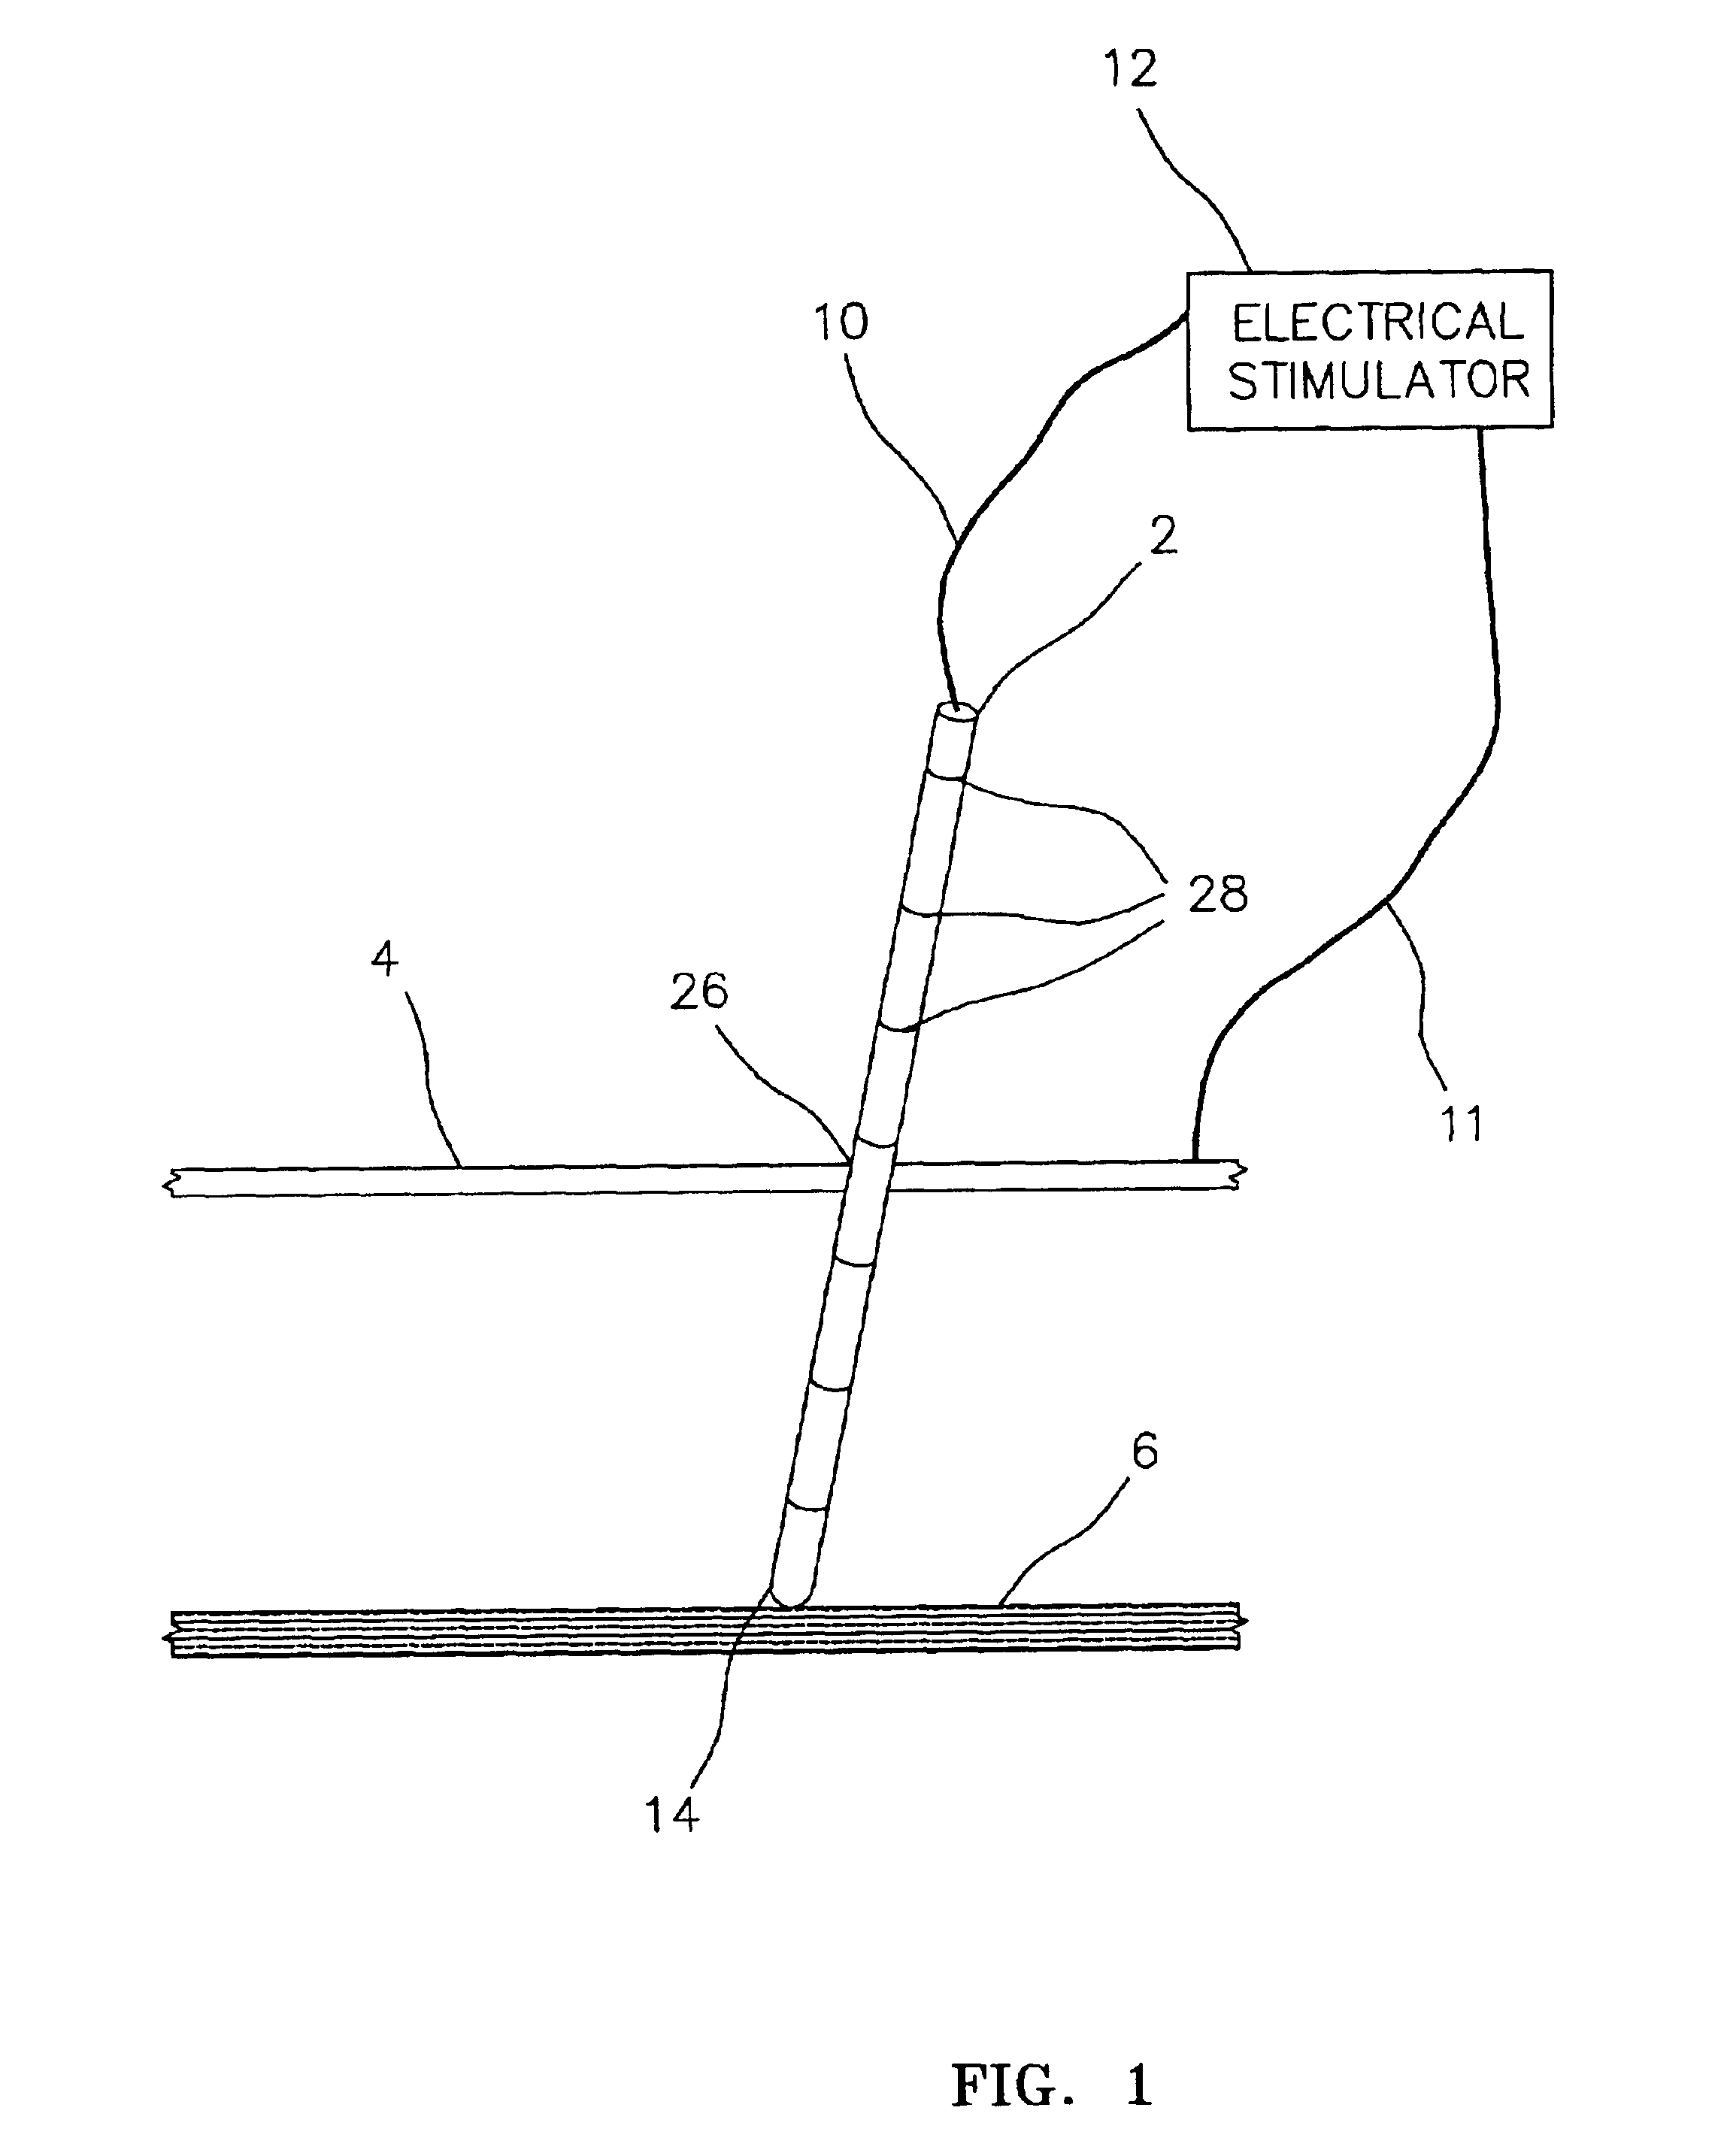 Electrically sensing and stimulating system for placement of a nerve stimulator or sensor